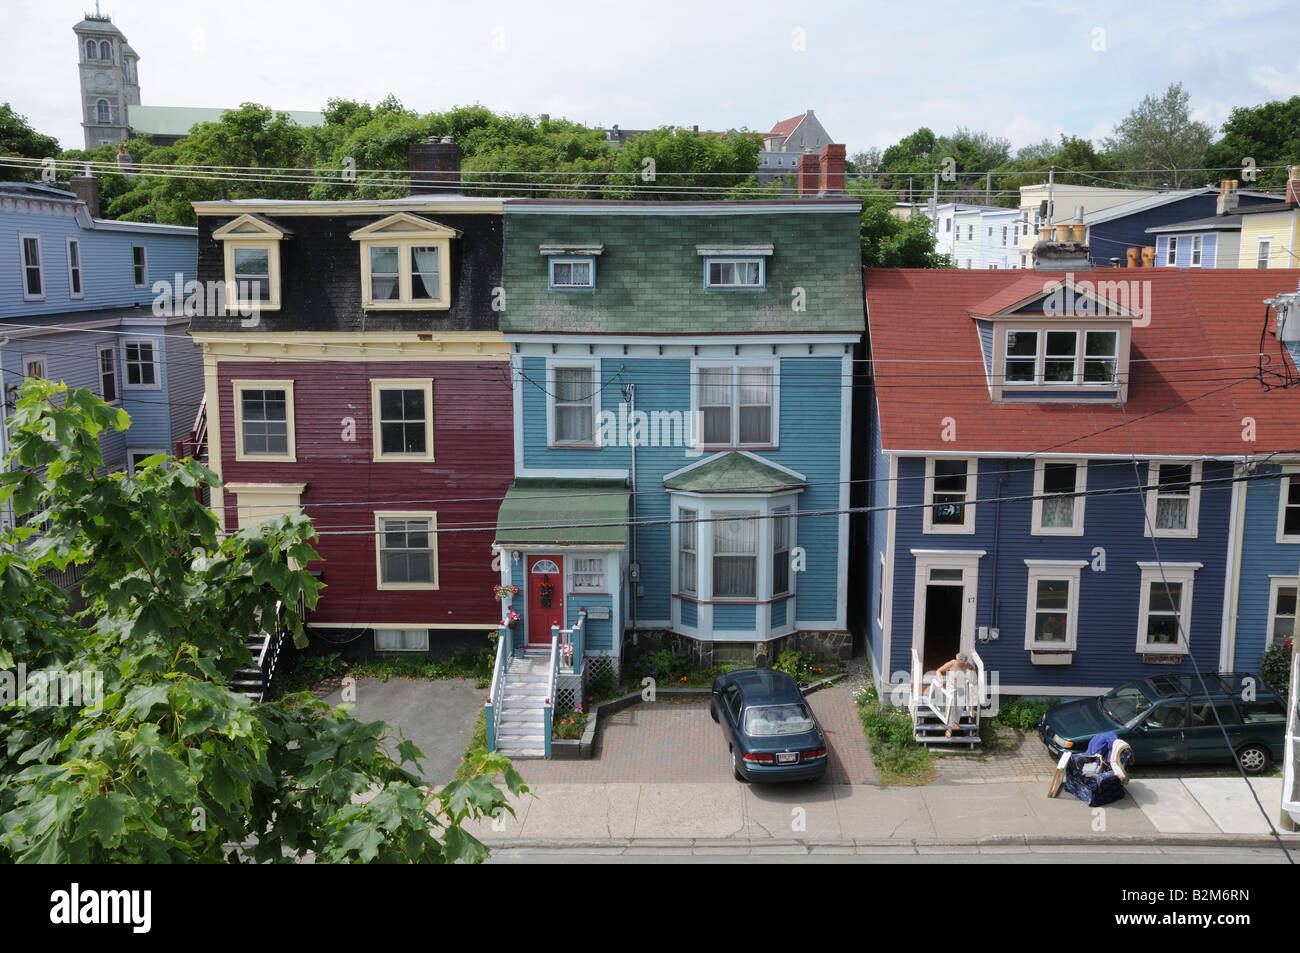 Some of the colorful frame houses of St John's, the capital of Newfoundland and Labrador. Stock Photo